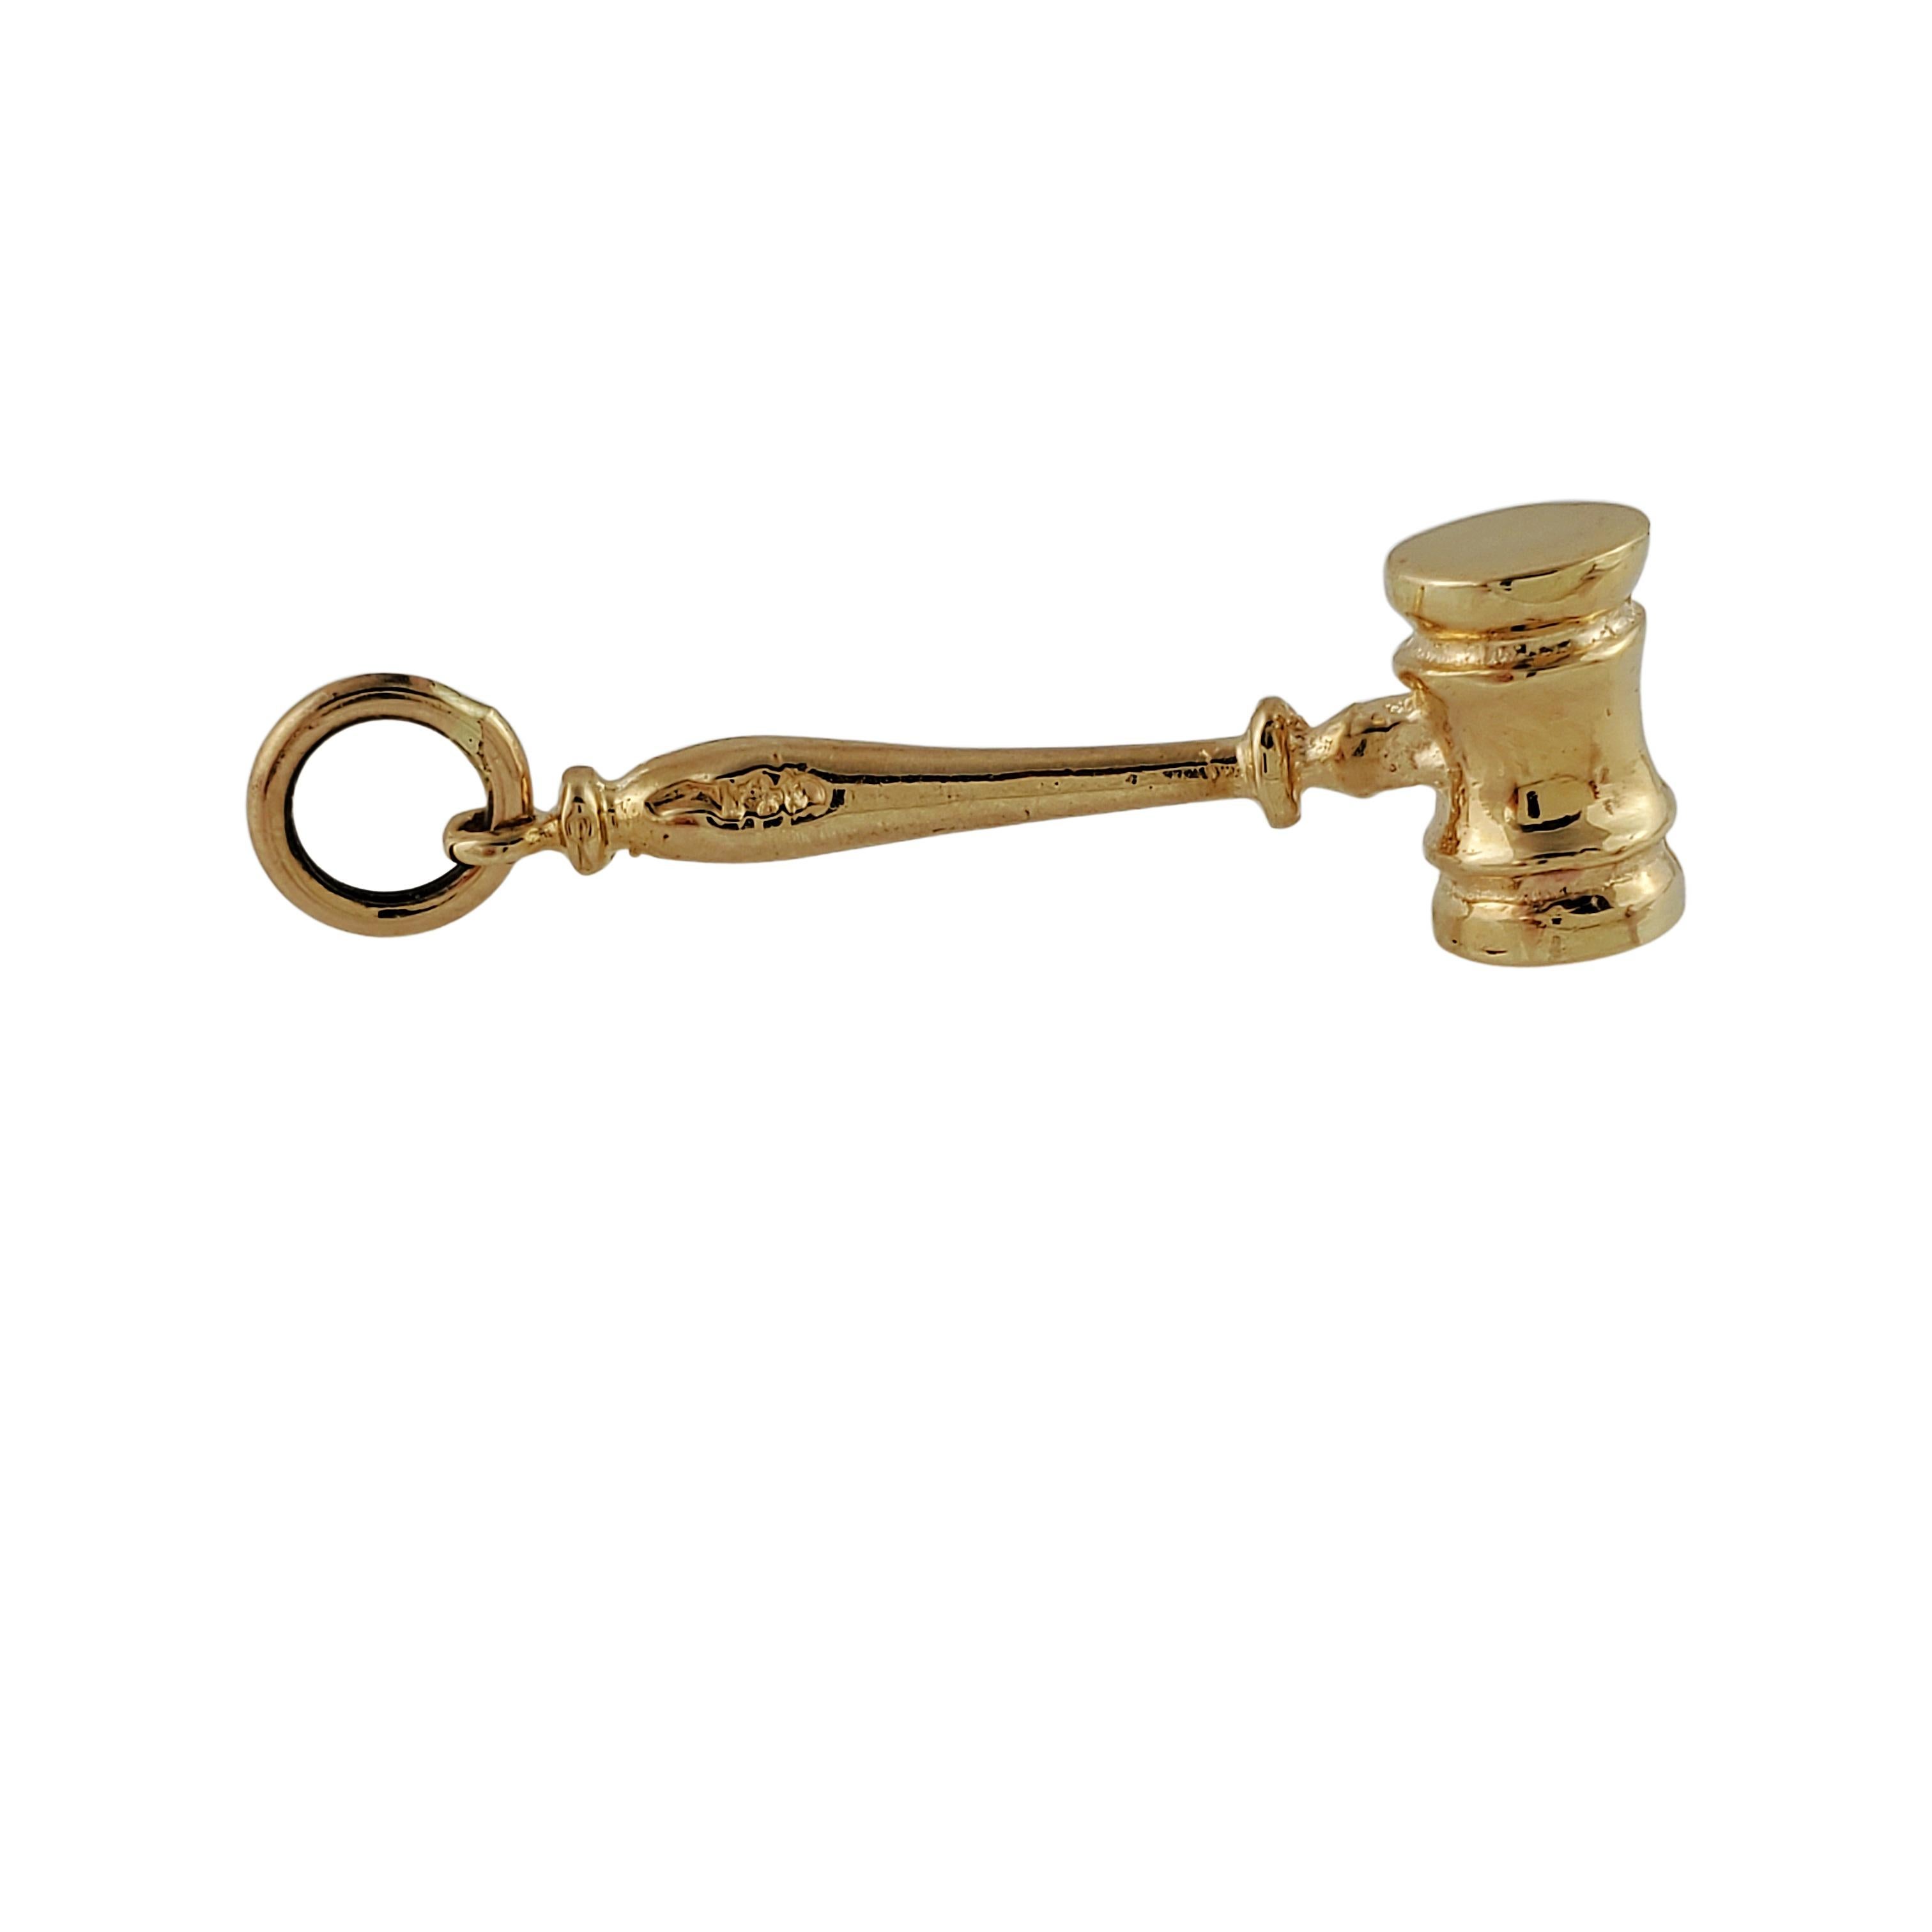 Vintage 14K Yellow Gold Mallet Charm

3D Mallet charm is meticulously crafted in 14k yellow gold.

Size: 24mm x 8mm

Weight: 1.6 gr / 1.0 dwt

Hallmark: 14k

Very good condition, professionally polished.

Will come packaged in a gift box or pouch